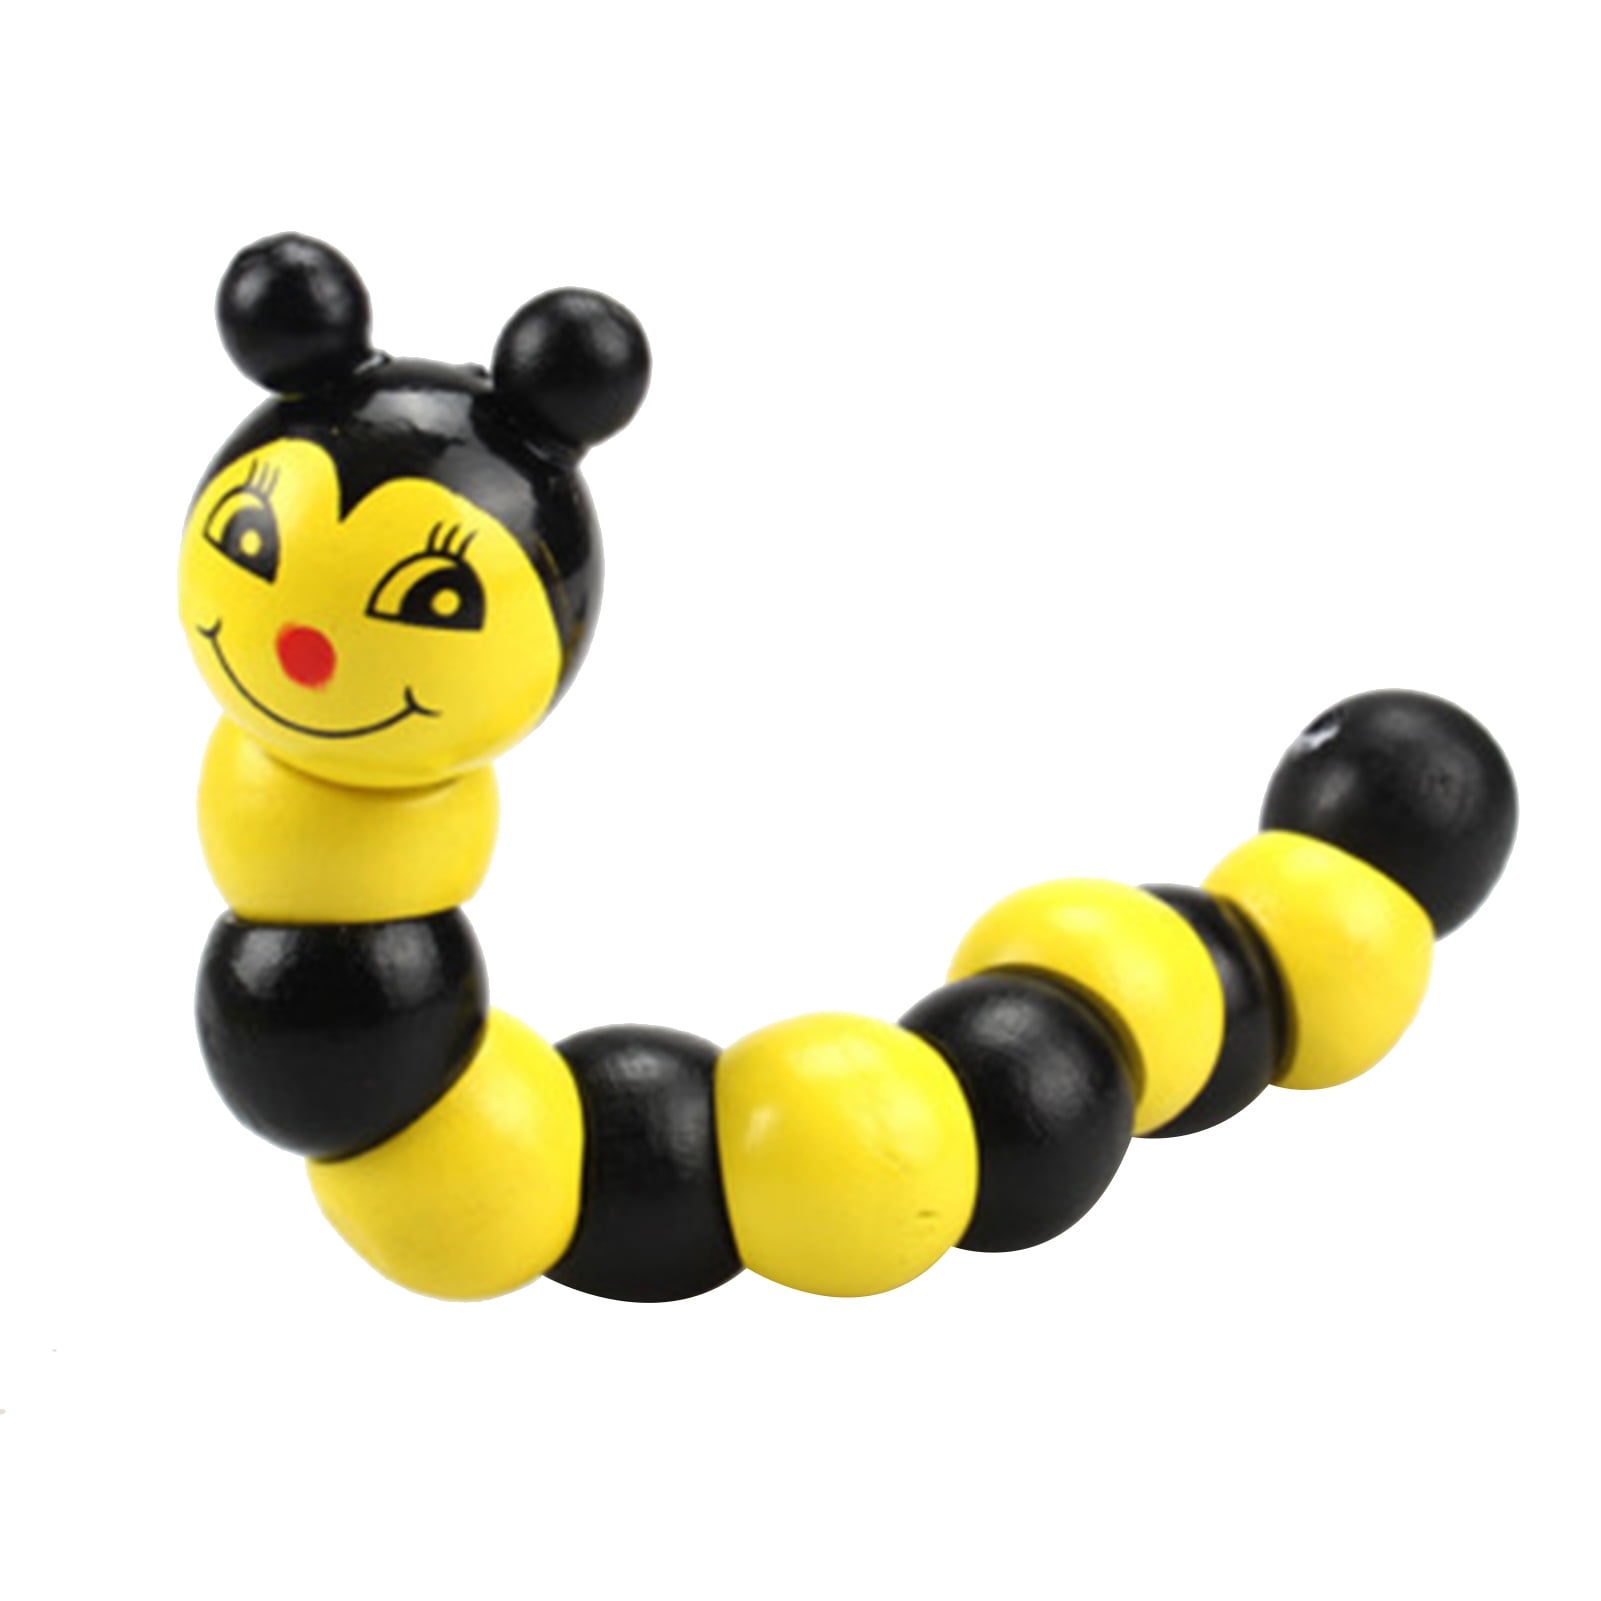 Simulation Caterpillar Wooden Twisted Worms Kids Children Early Educational Toys 